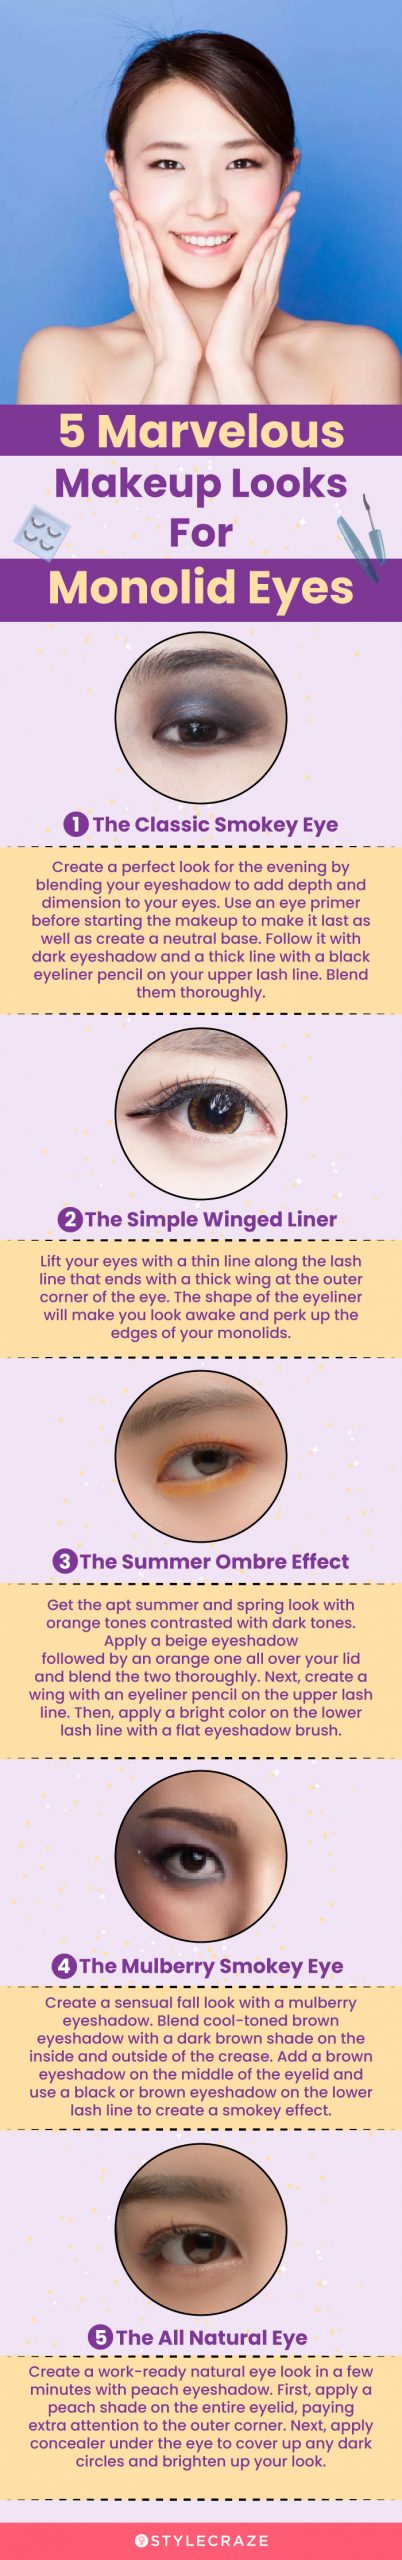 5 marvelous makeup looks for monolid eyes (infographic)